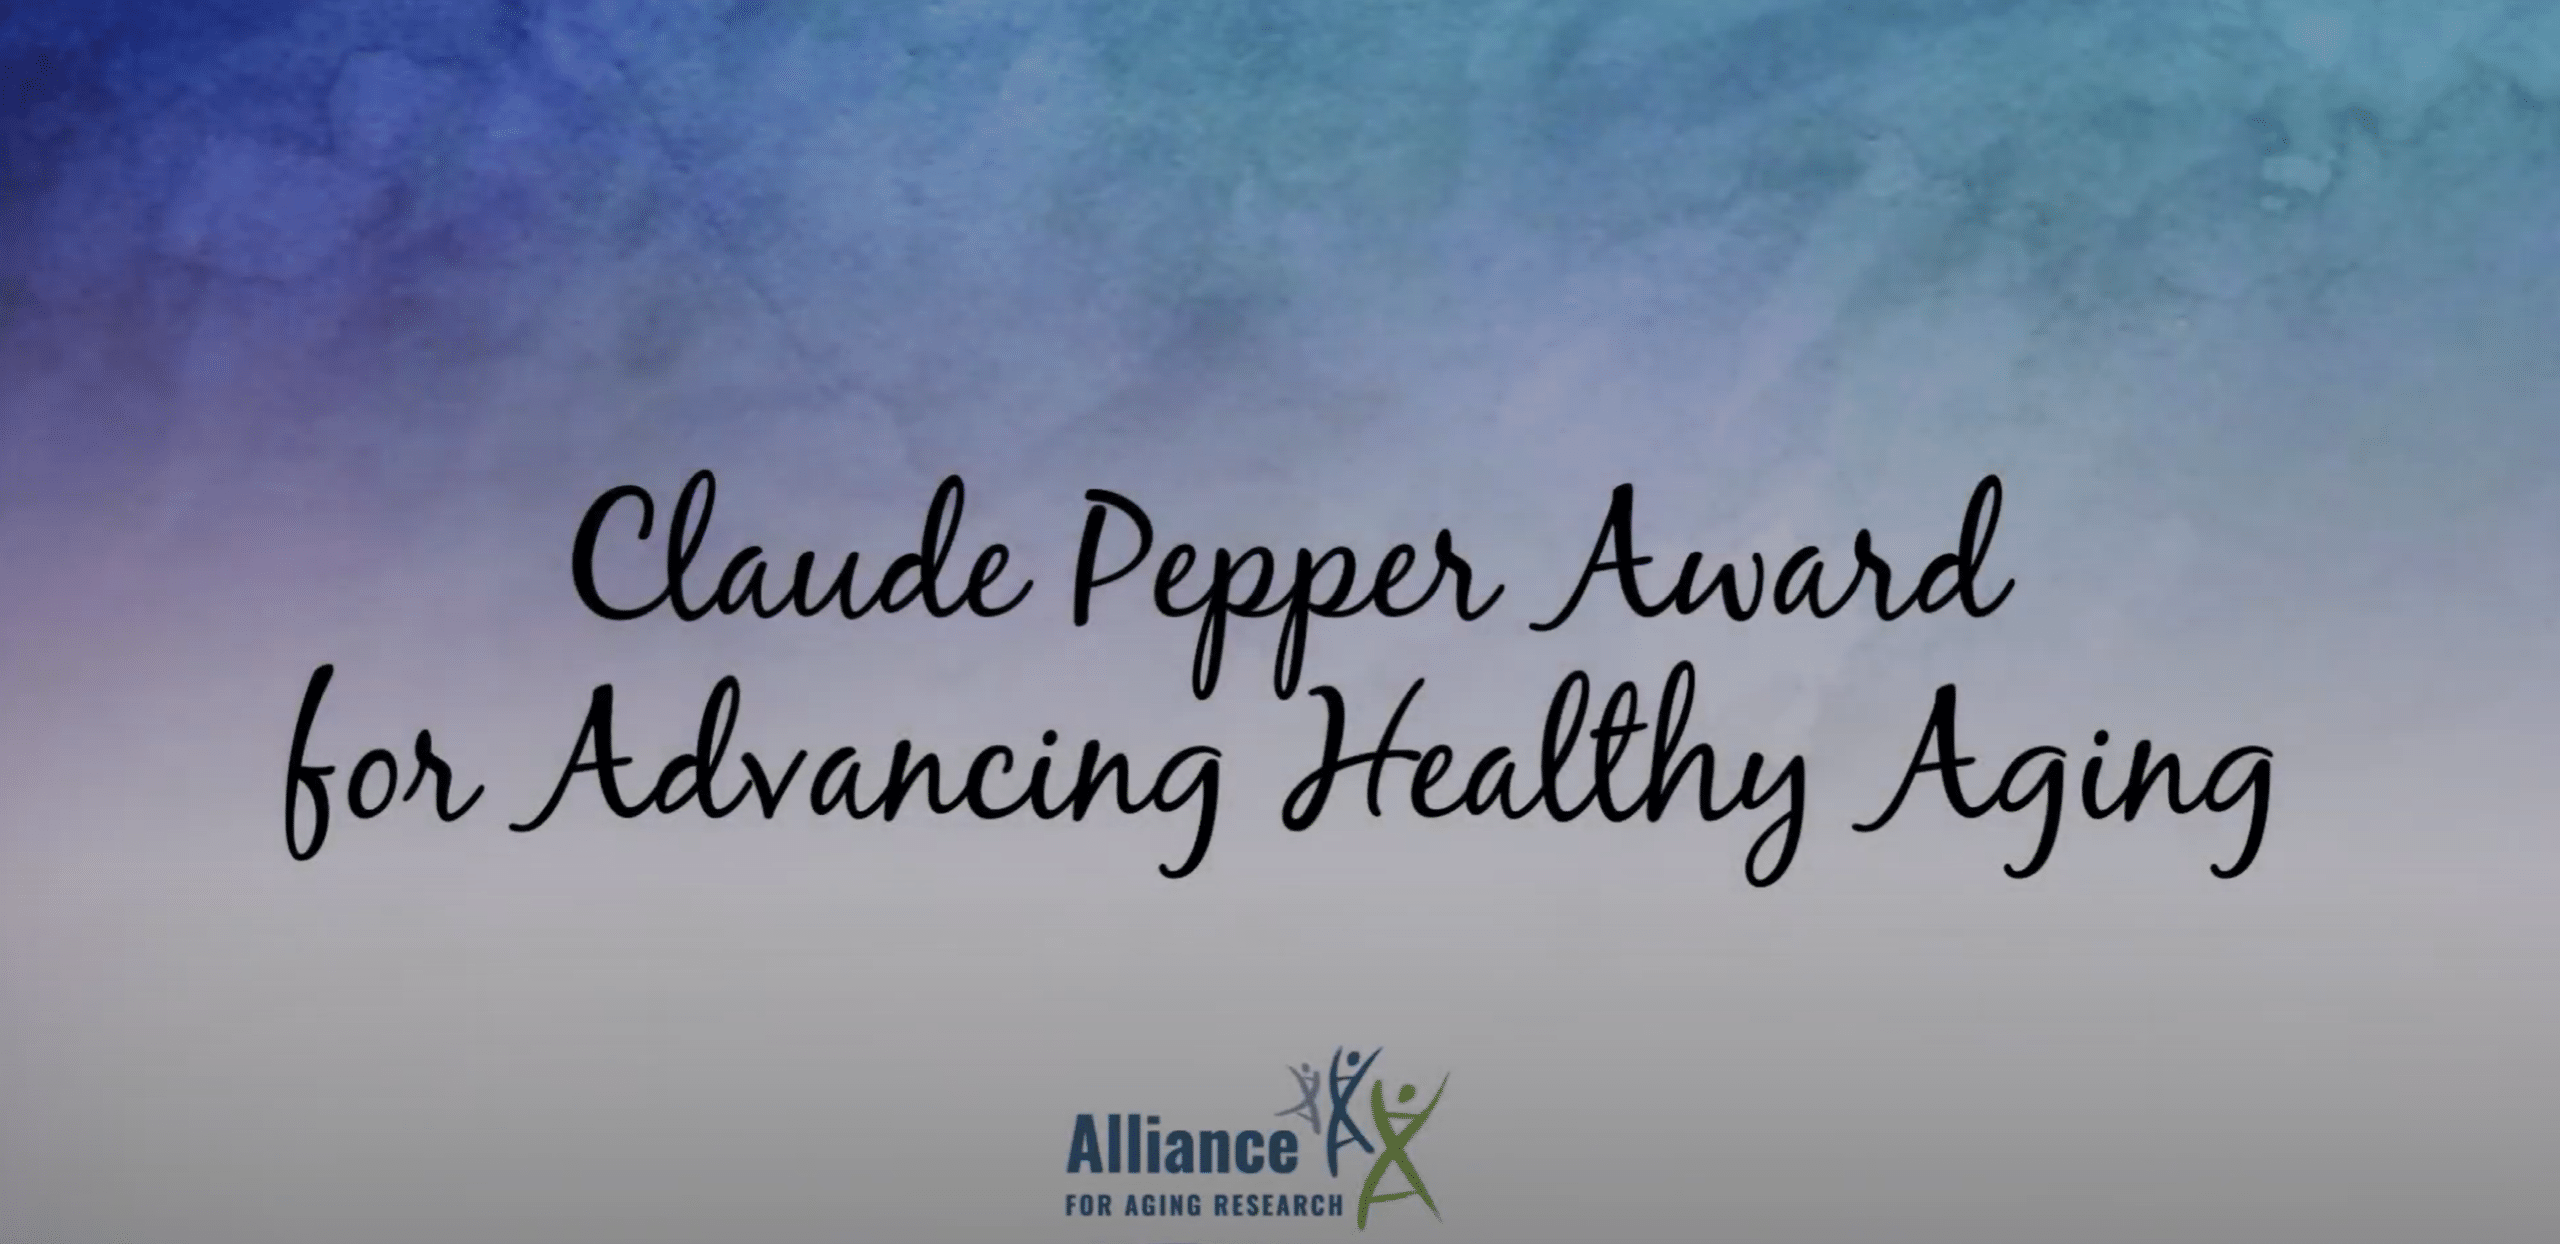 Title slide for Claude Pepper Award for Advancing Healthy Aging.